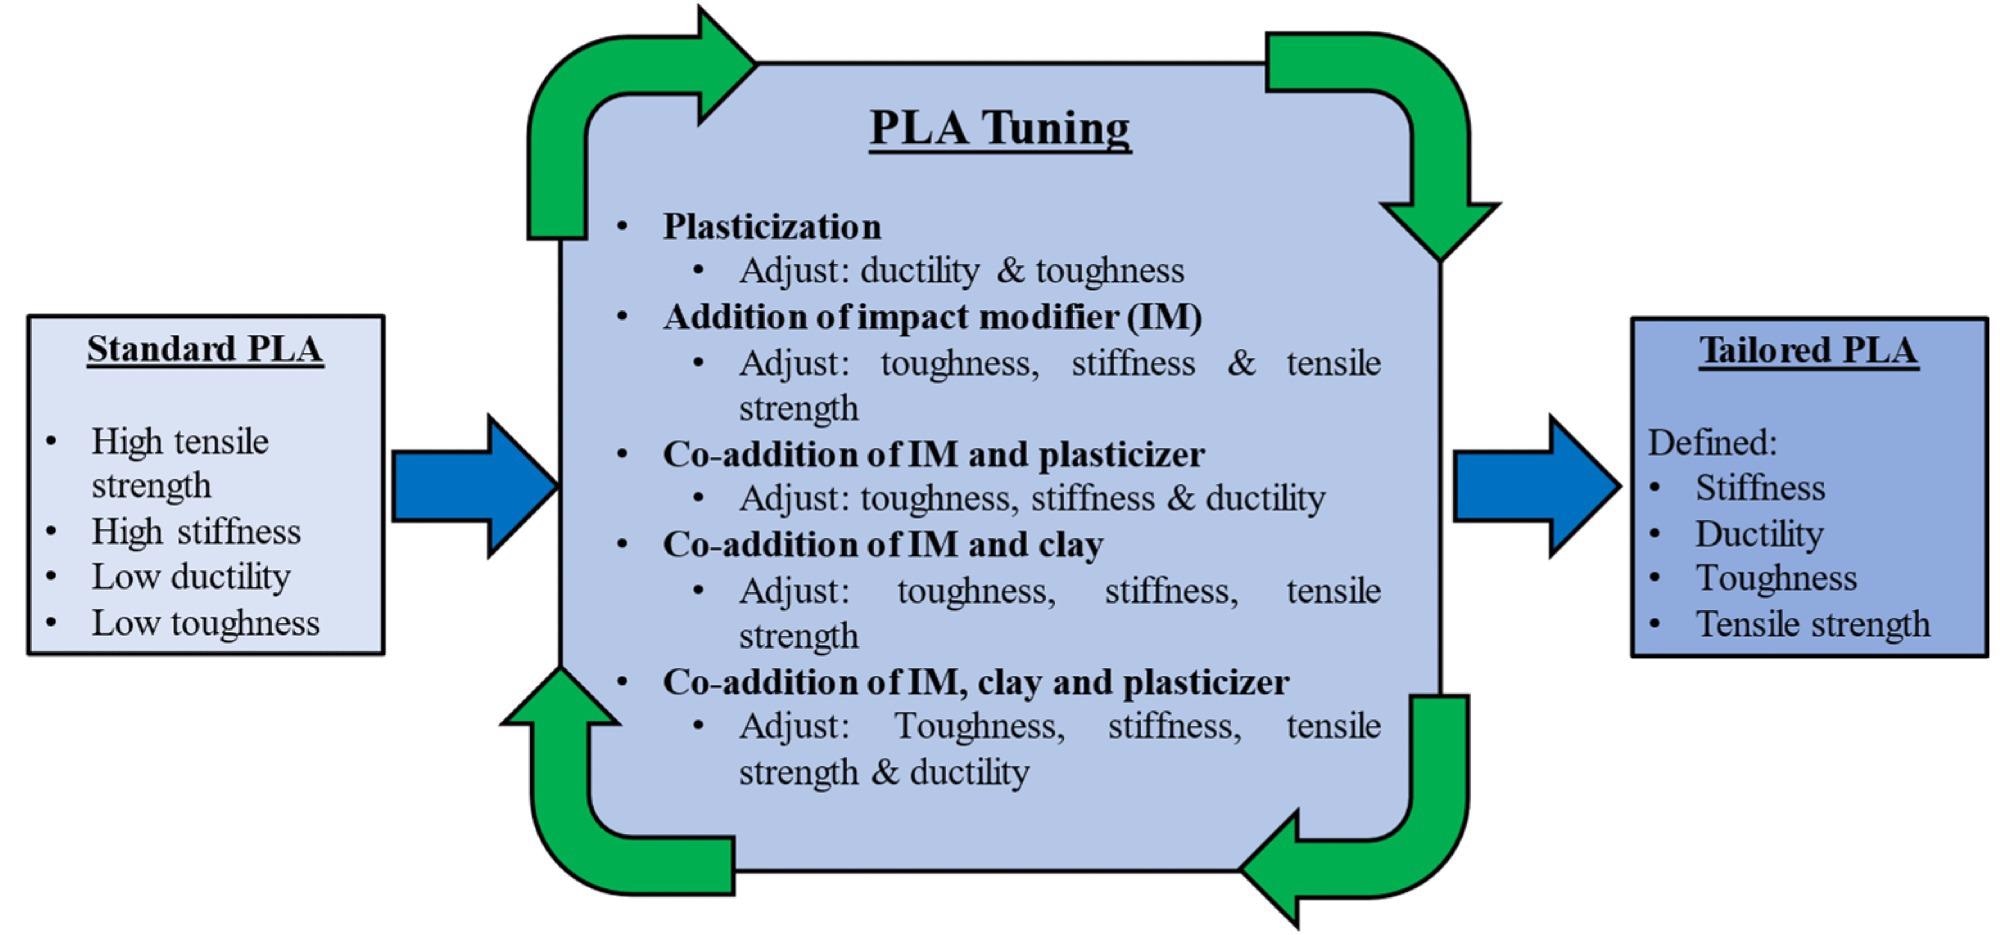 Tuning PLA properties with a variety of additives.